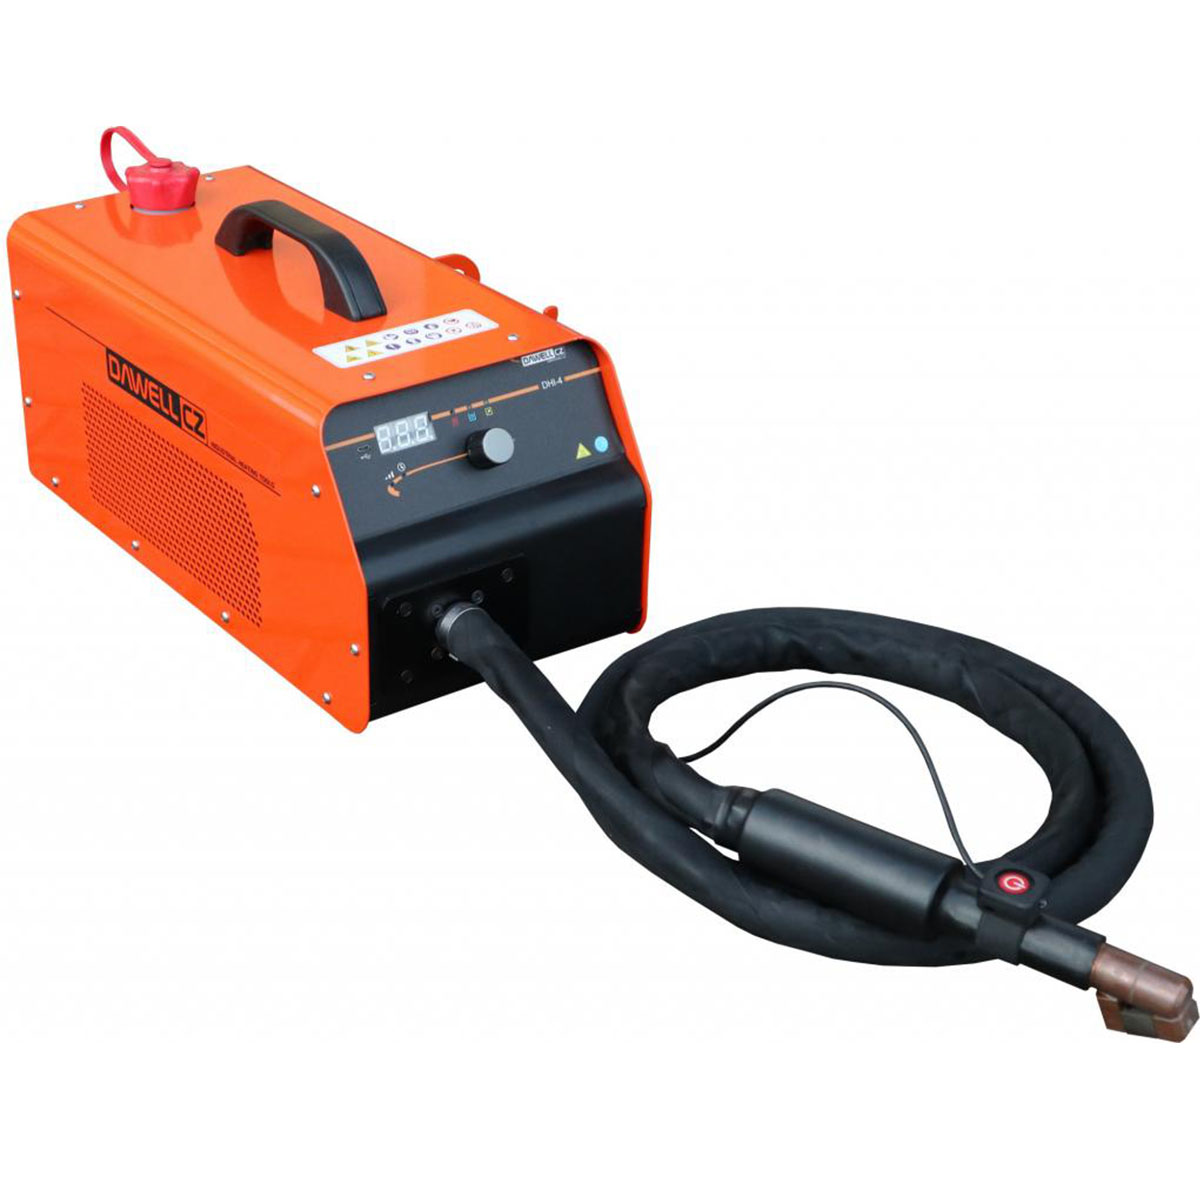 DHI-44E Induction Heater for Truck Applications ~ Dawell 07-003-01